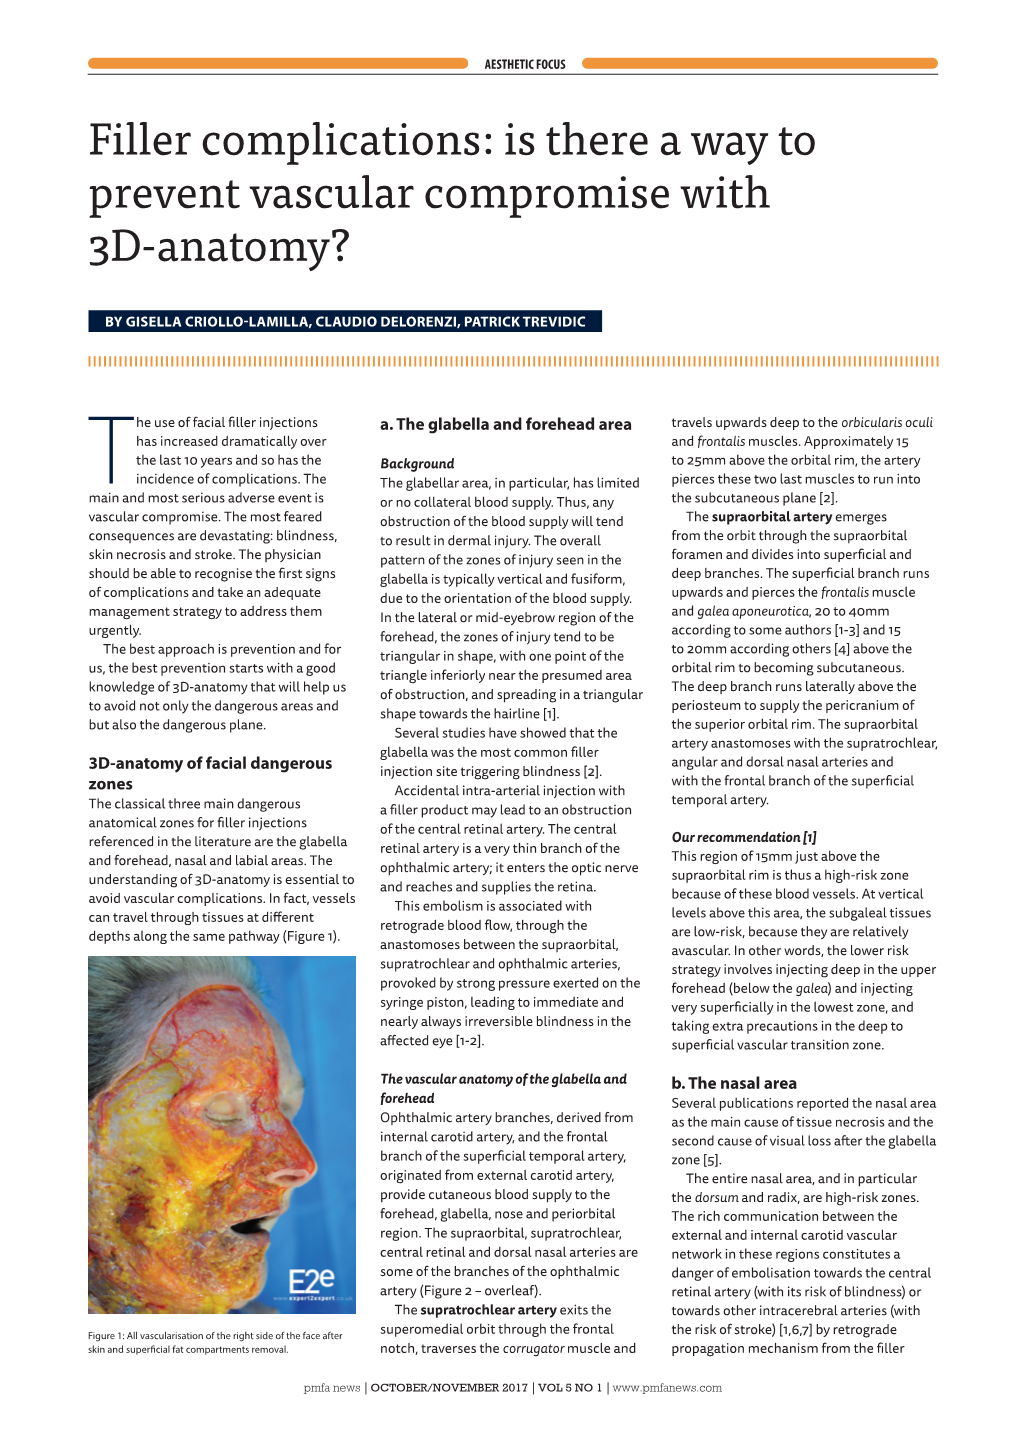 Filler Complications: Is There a Way to Prevent Vascular Compromise with 3D-Anatomy?